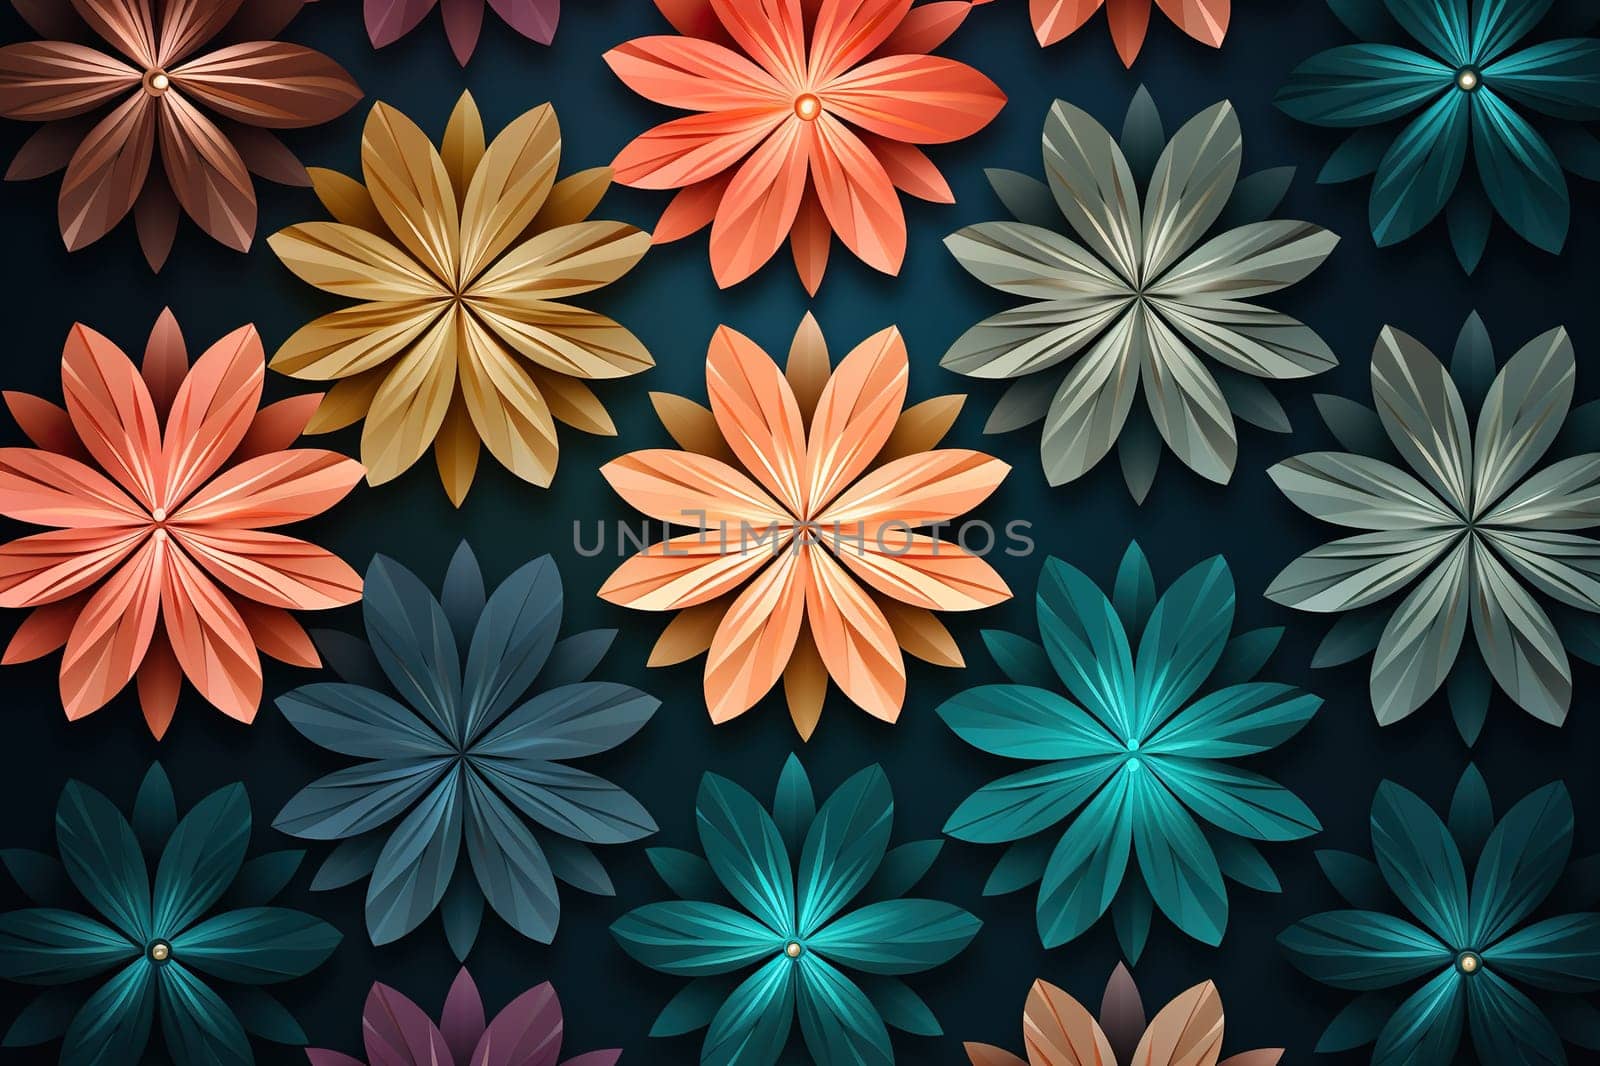 Dark background with repeating flowers.